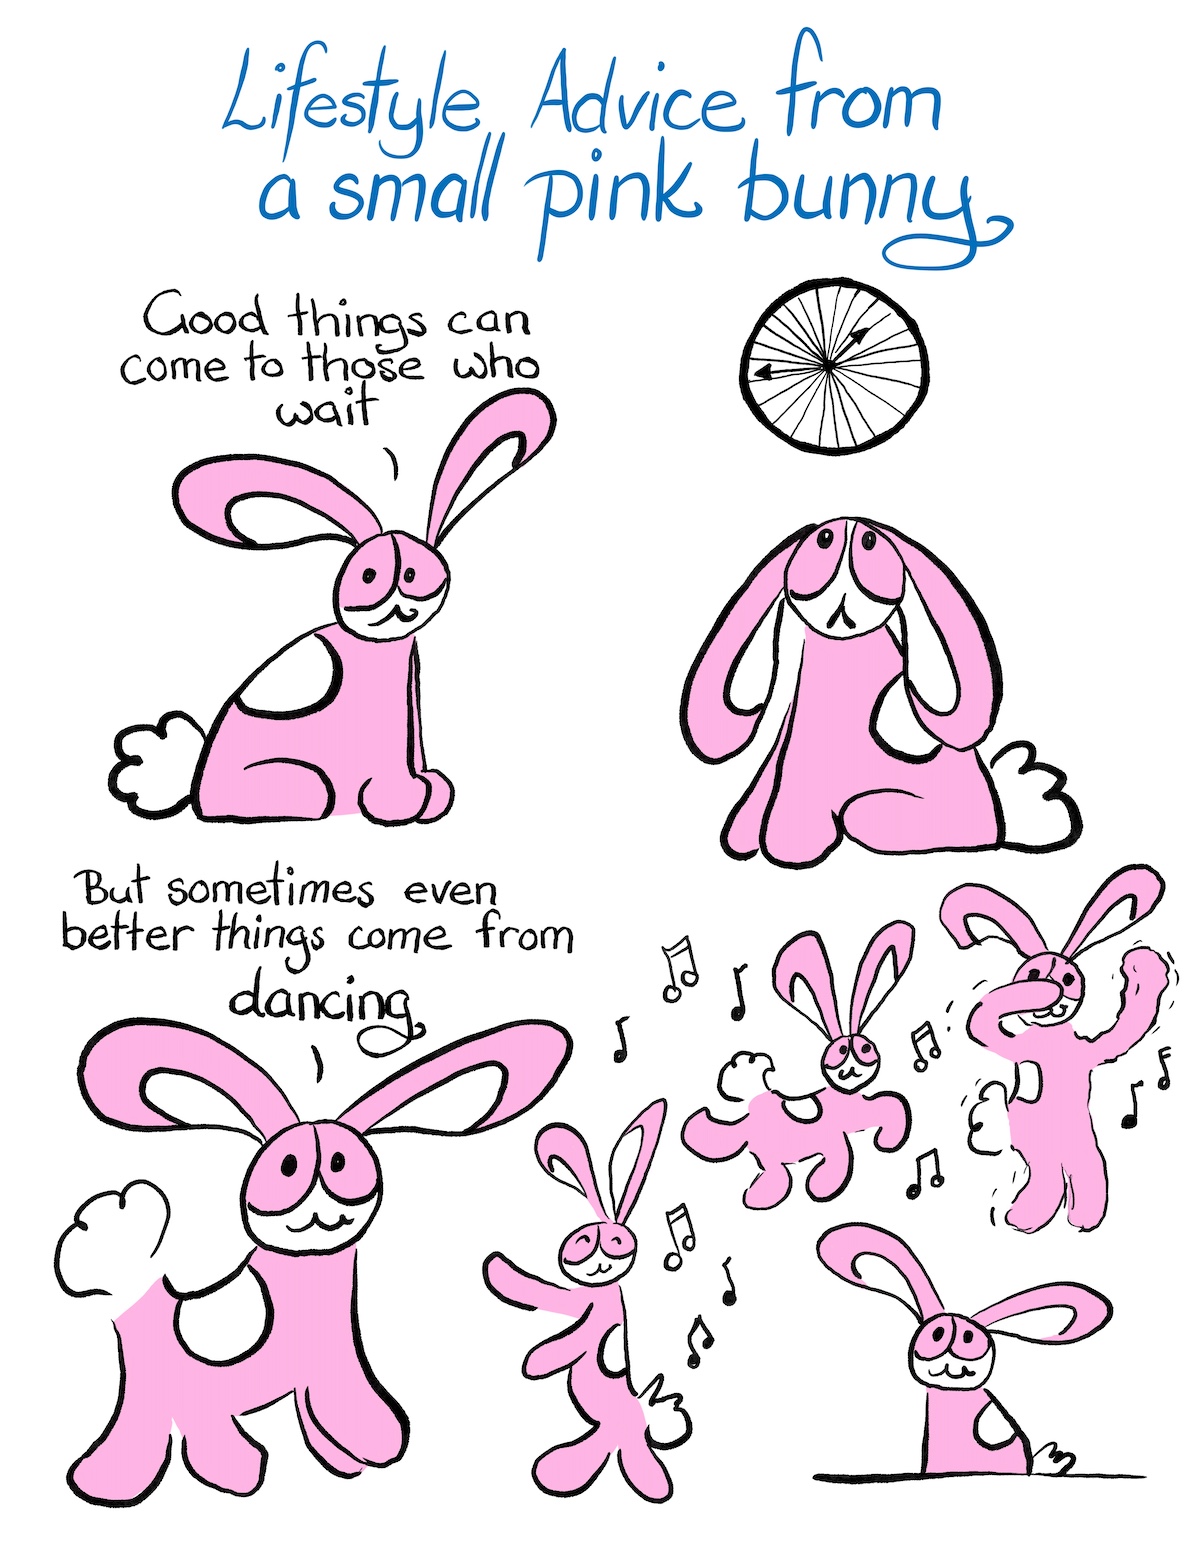 Lifestyle Advice from a Small Pink Bunny – Good Things Come to Those Who Wait (#674)